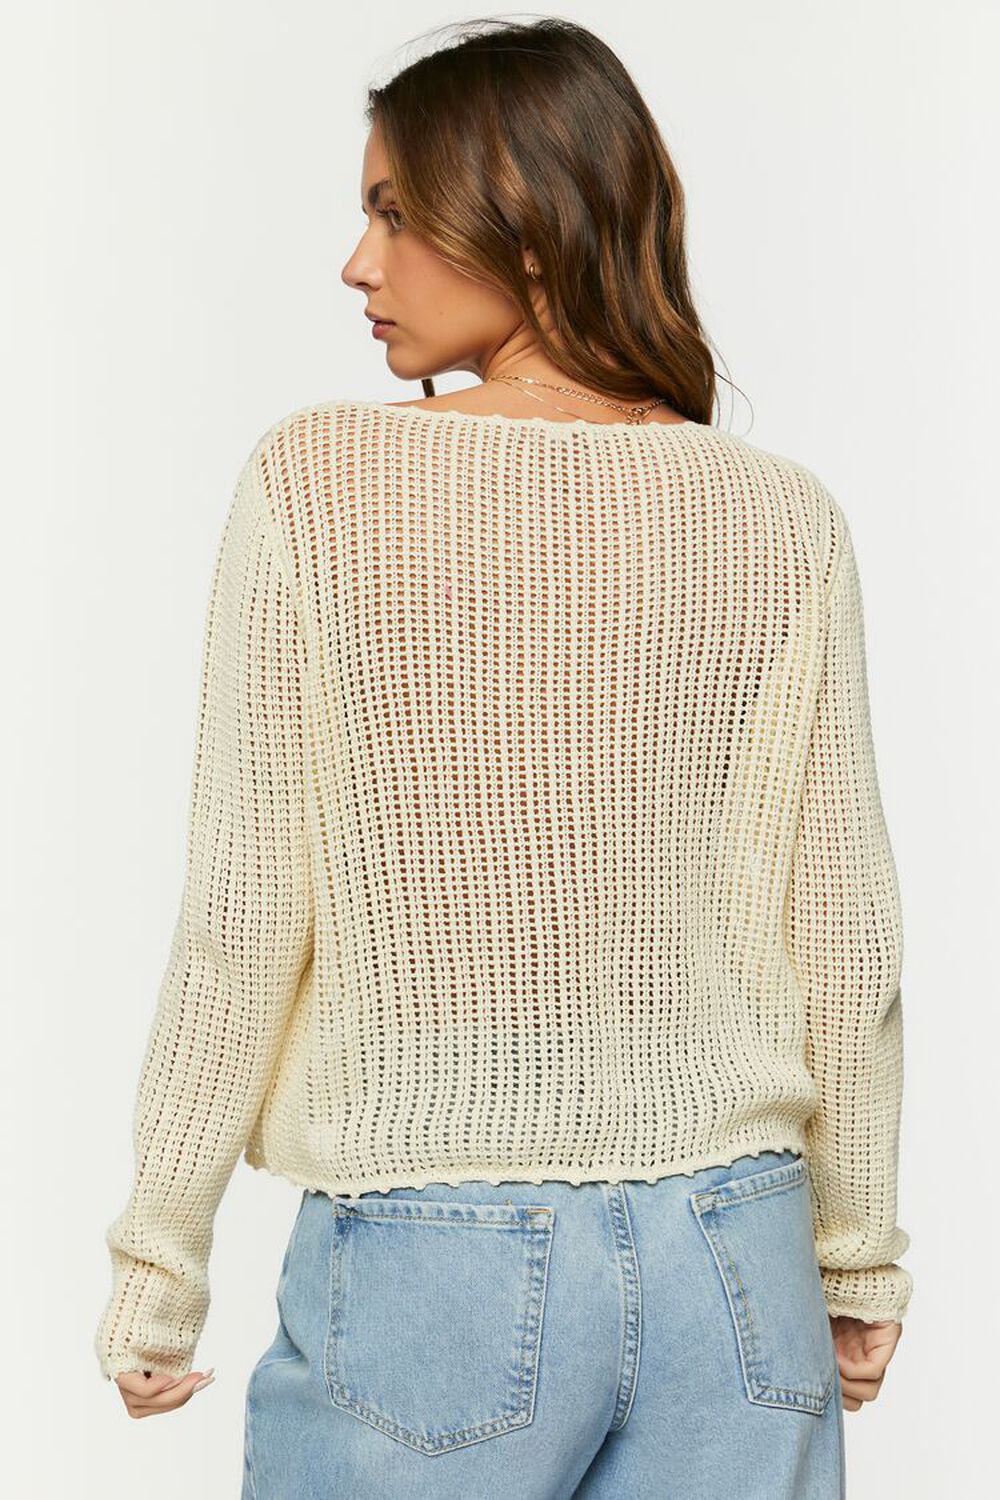 CREAM Open-Knit Floral Sweater, image 3